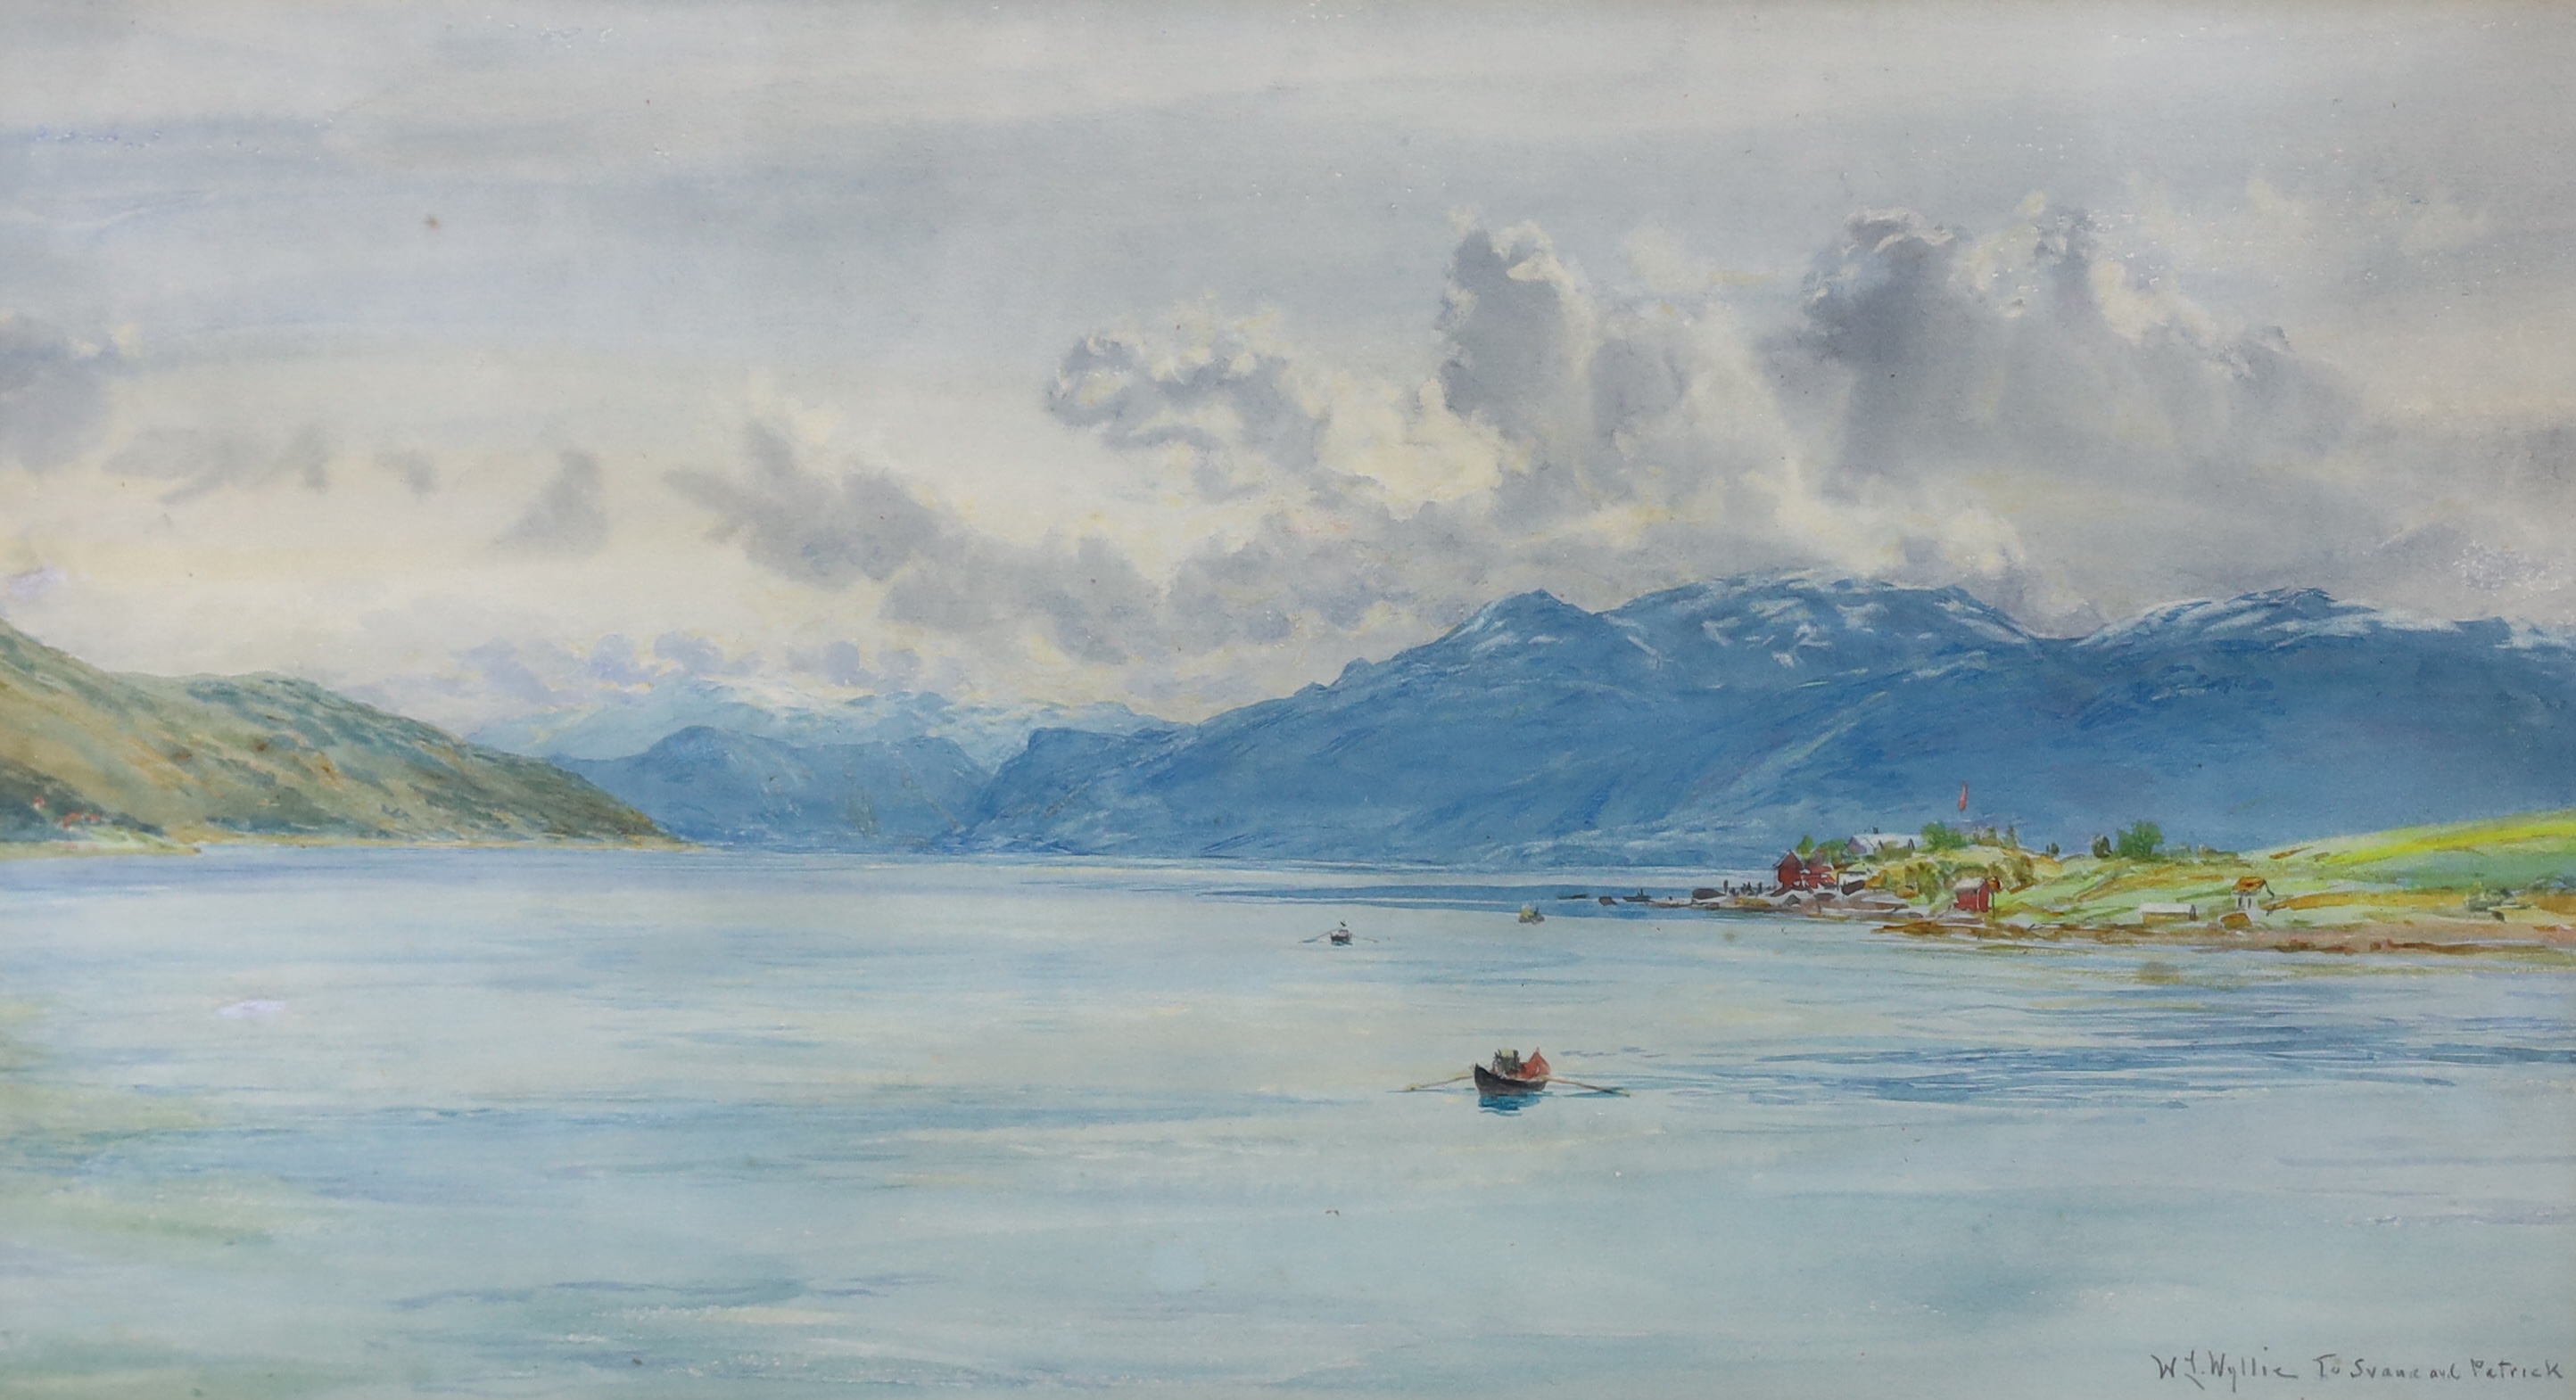 William Lionel Wyllie (English, 1851-1931), 'Balholm on the Sognefjord, Norway', watercolour, 23 x 42cm